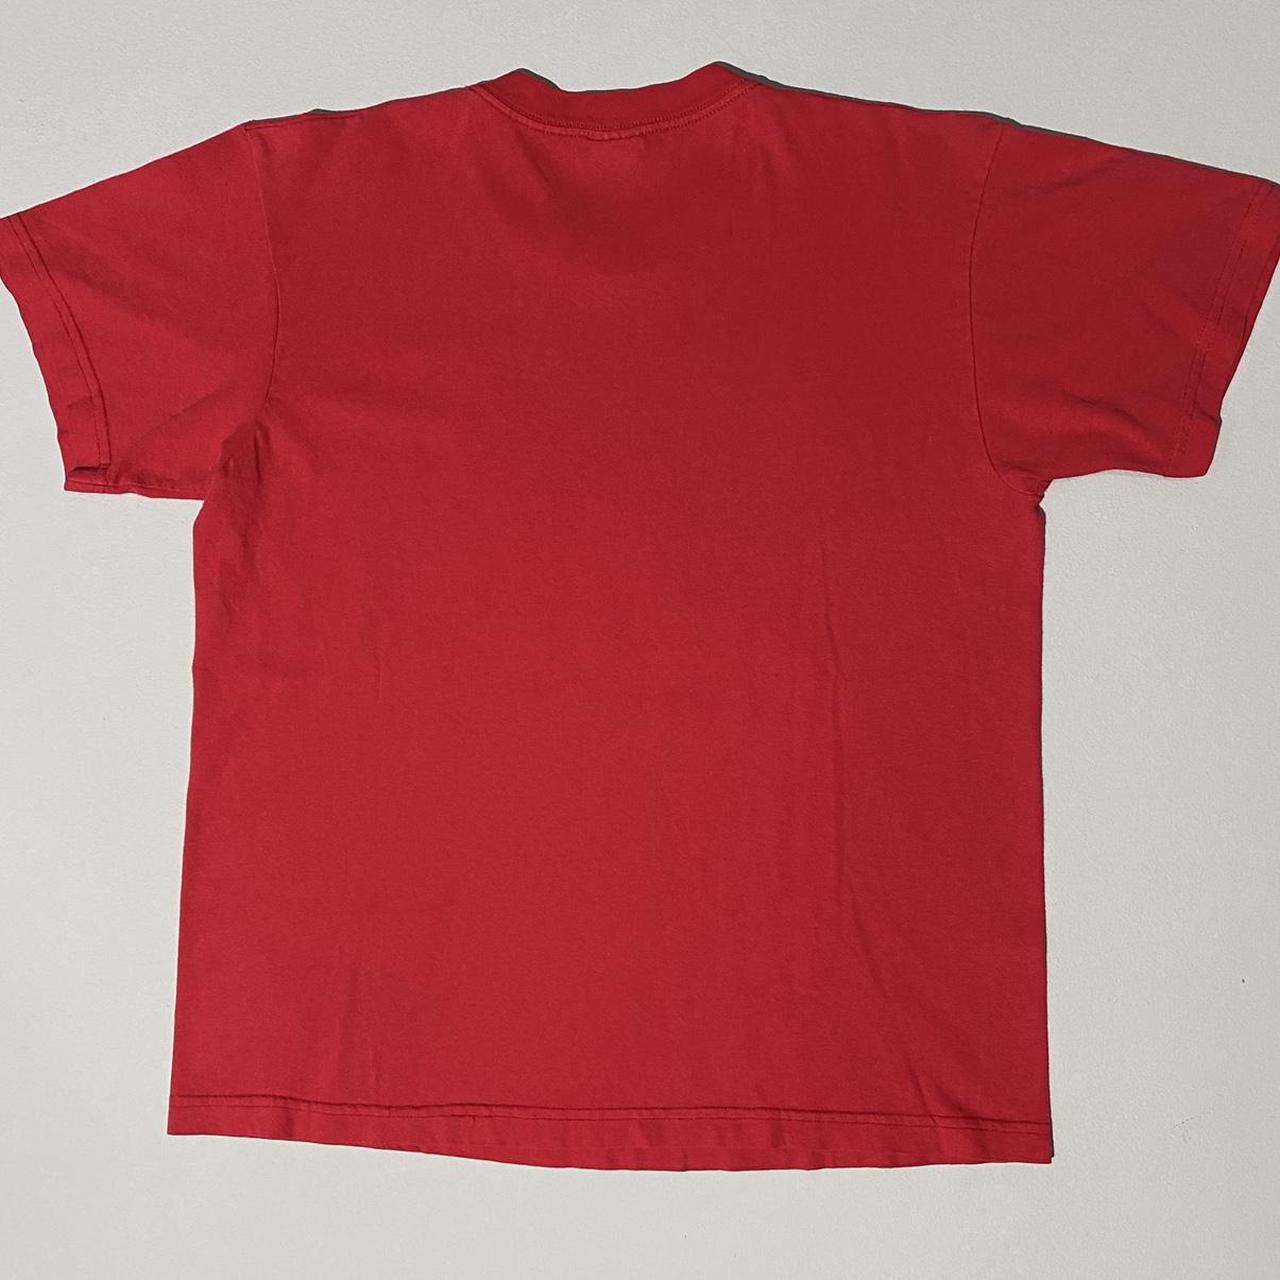 Product Image 4 - Vintage 90s Noah’s Ark Red